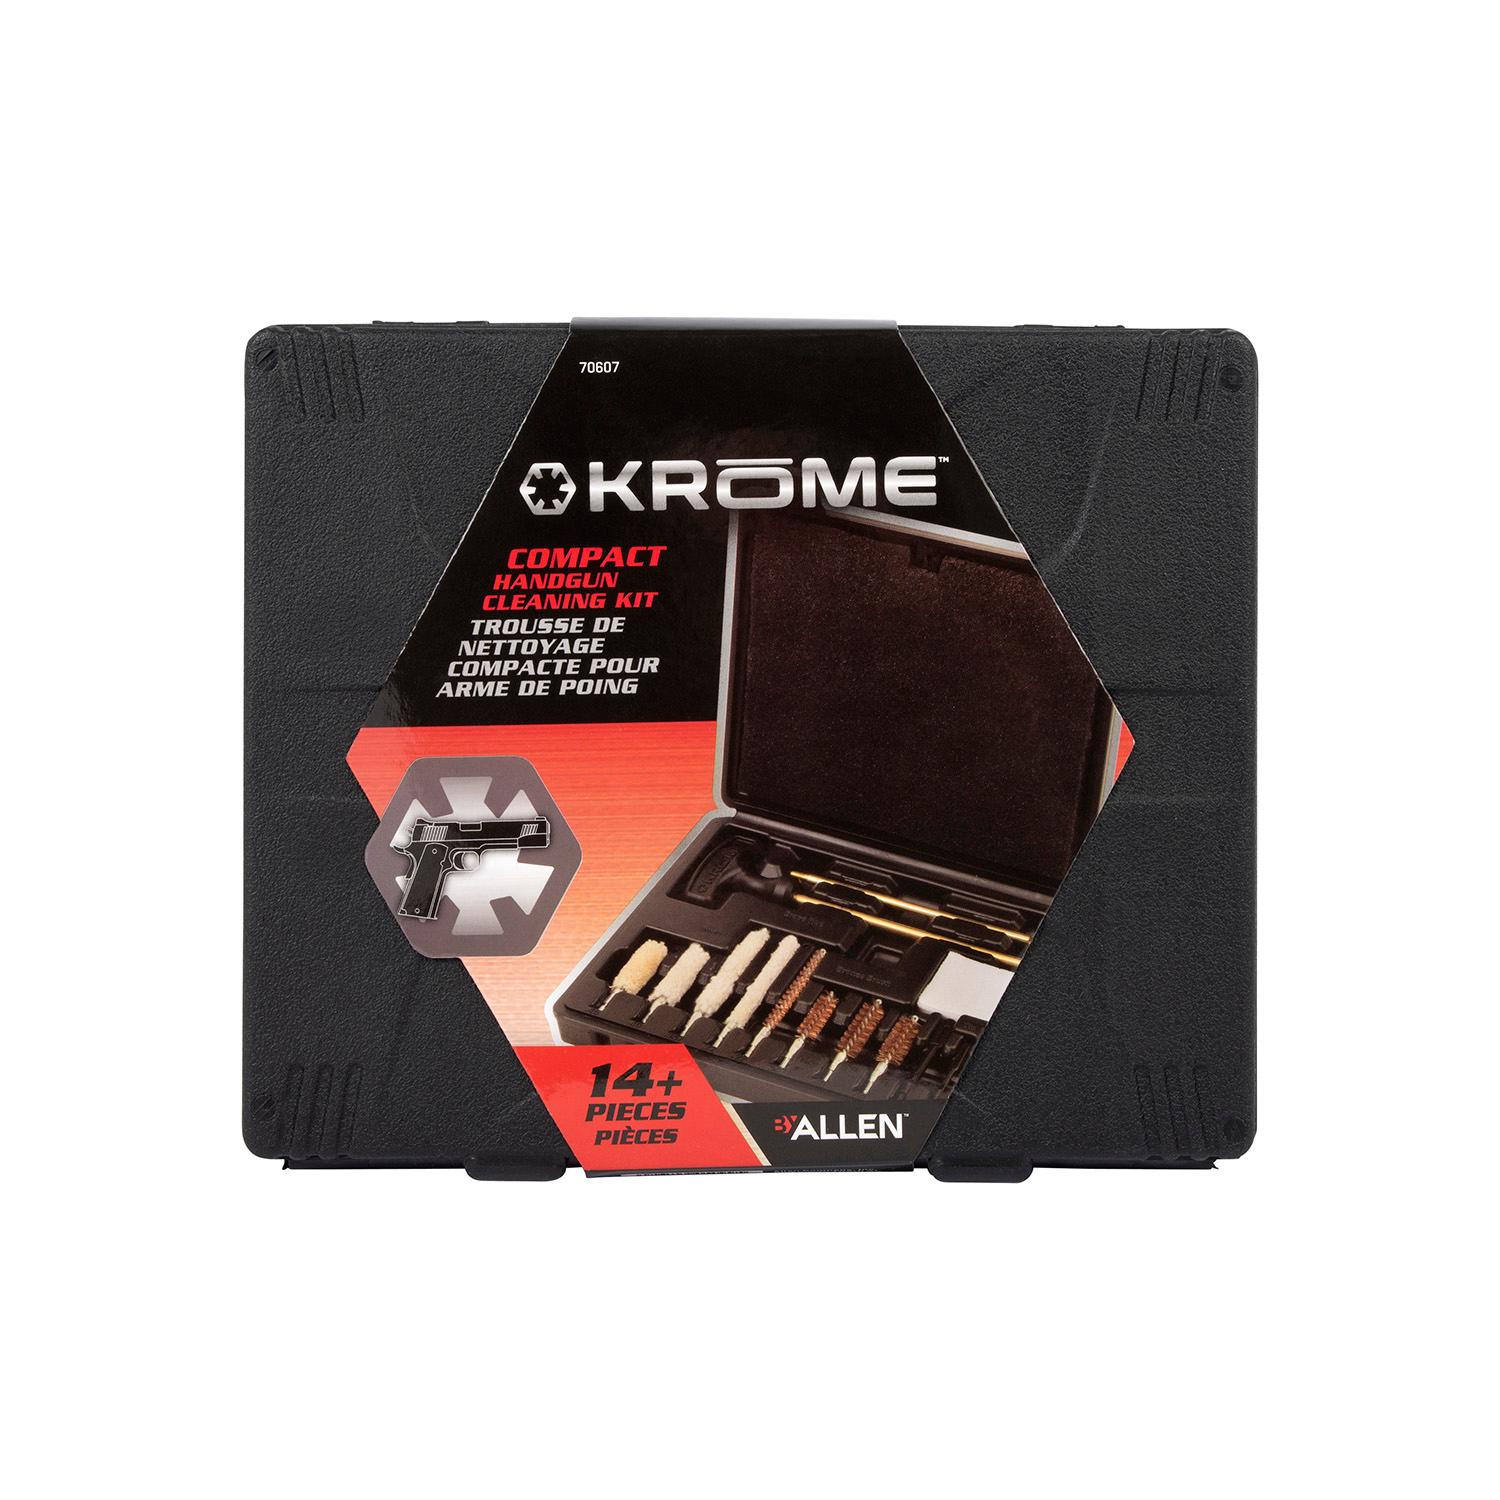  Krome 70607 Compact Handgun Cleaning Kit 22/38/357/44/45/9mm  14 Pieces